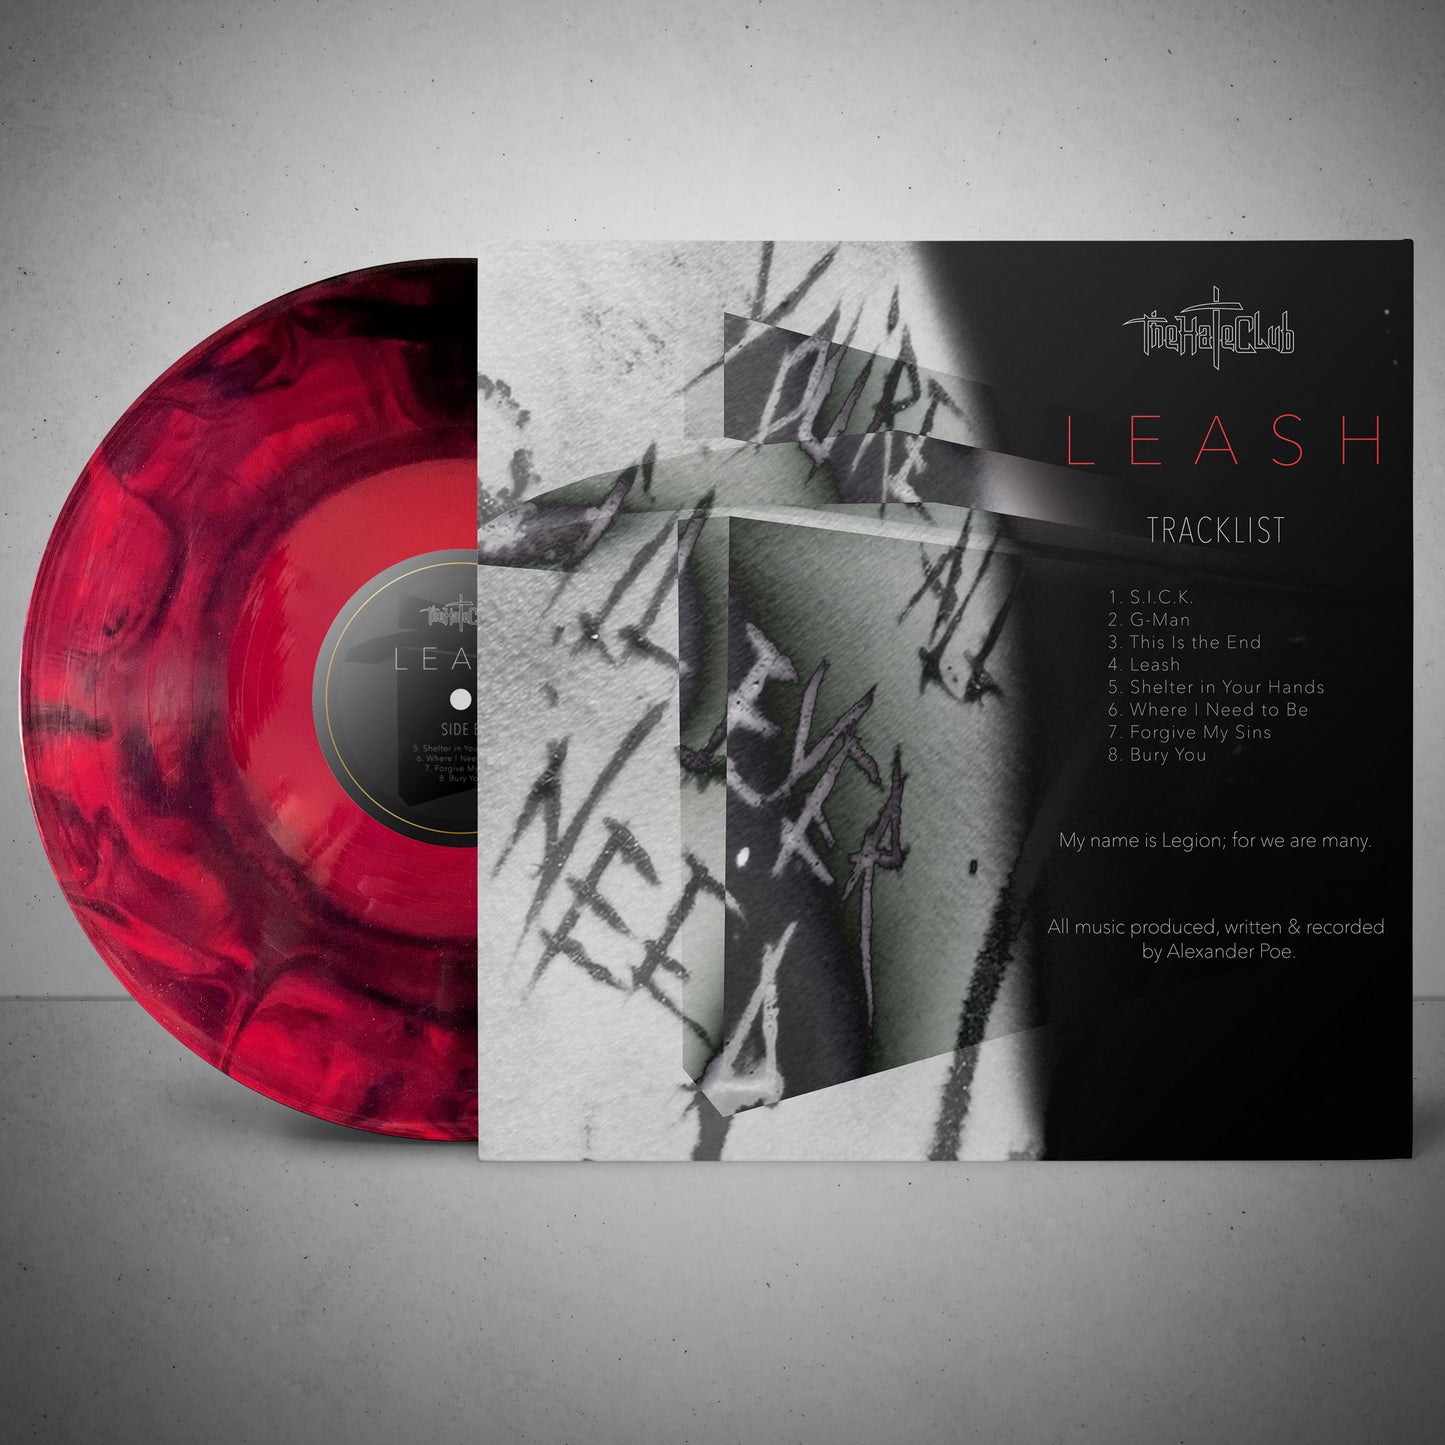 The Hate Club LEASH Signed Limited Edition Blood Vinyl - US Only